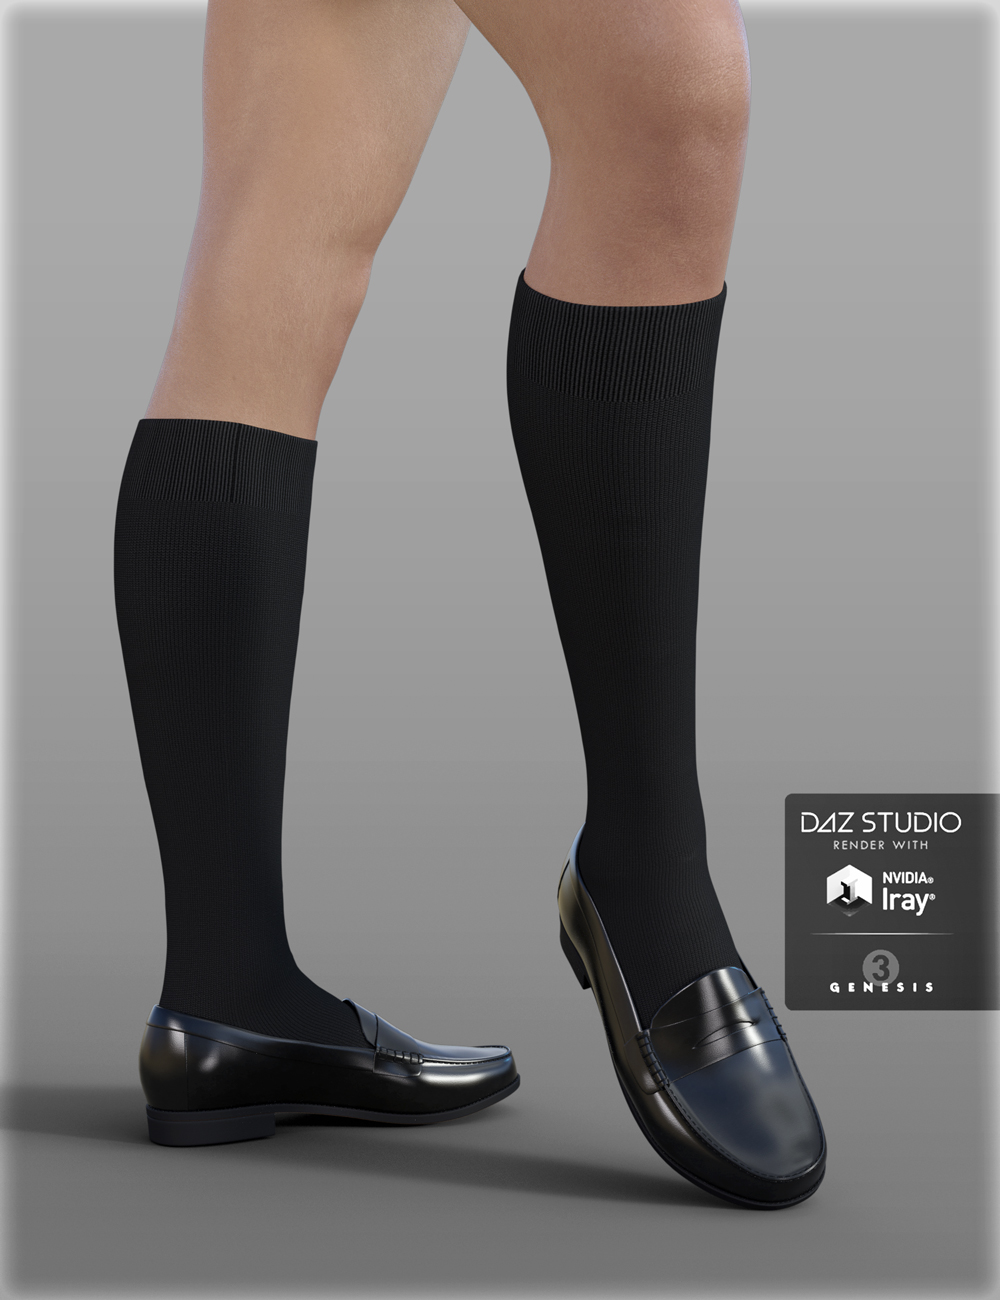 H&C Japanese School Uniforms for Genesis 3 Female(s) by: IH Kang, 3D Models by Daz 3D